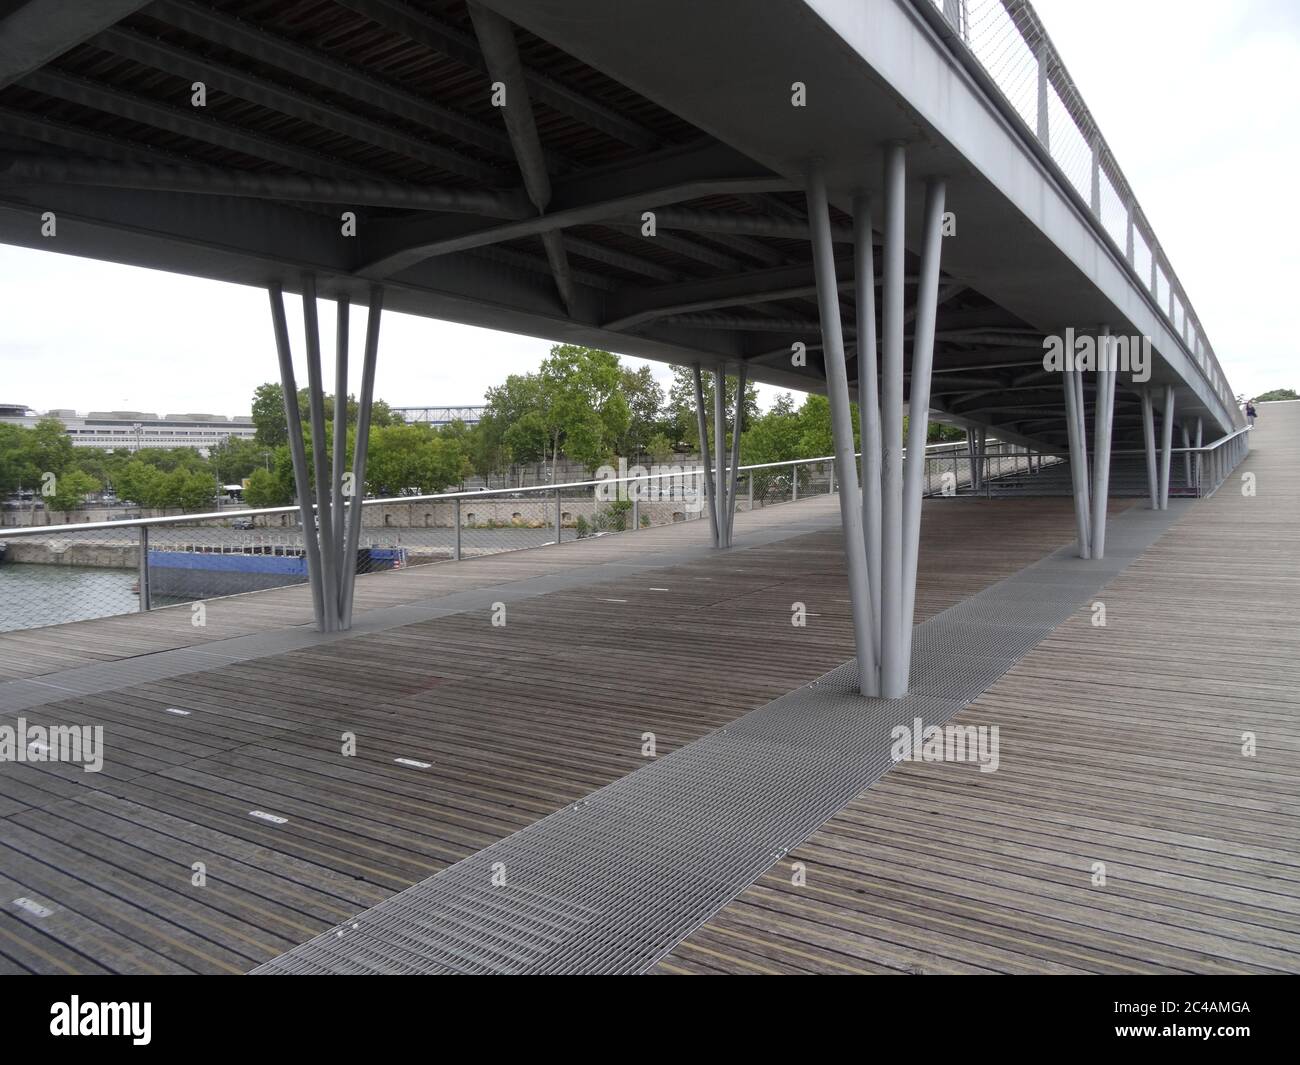 Bercy is a popular arena and park near it. Located in Paris, France. Walk through the park and the bridge Passerelle Simone-de-Beauvoir over the Seine Stock Photo